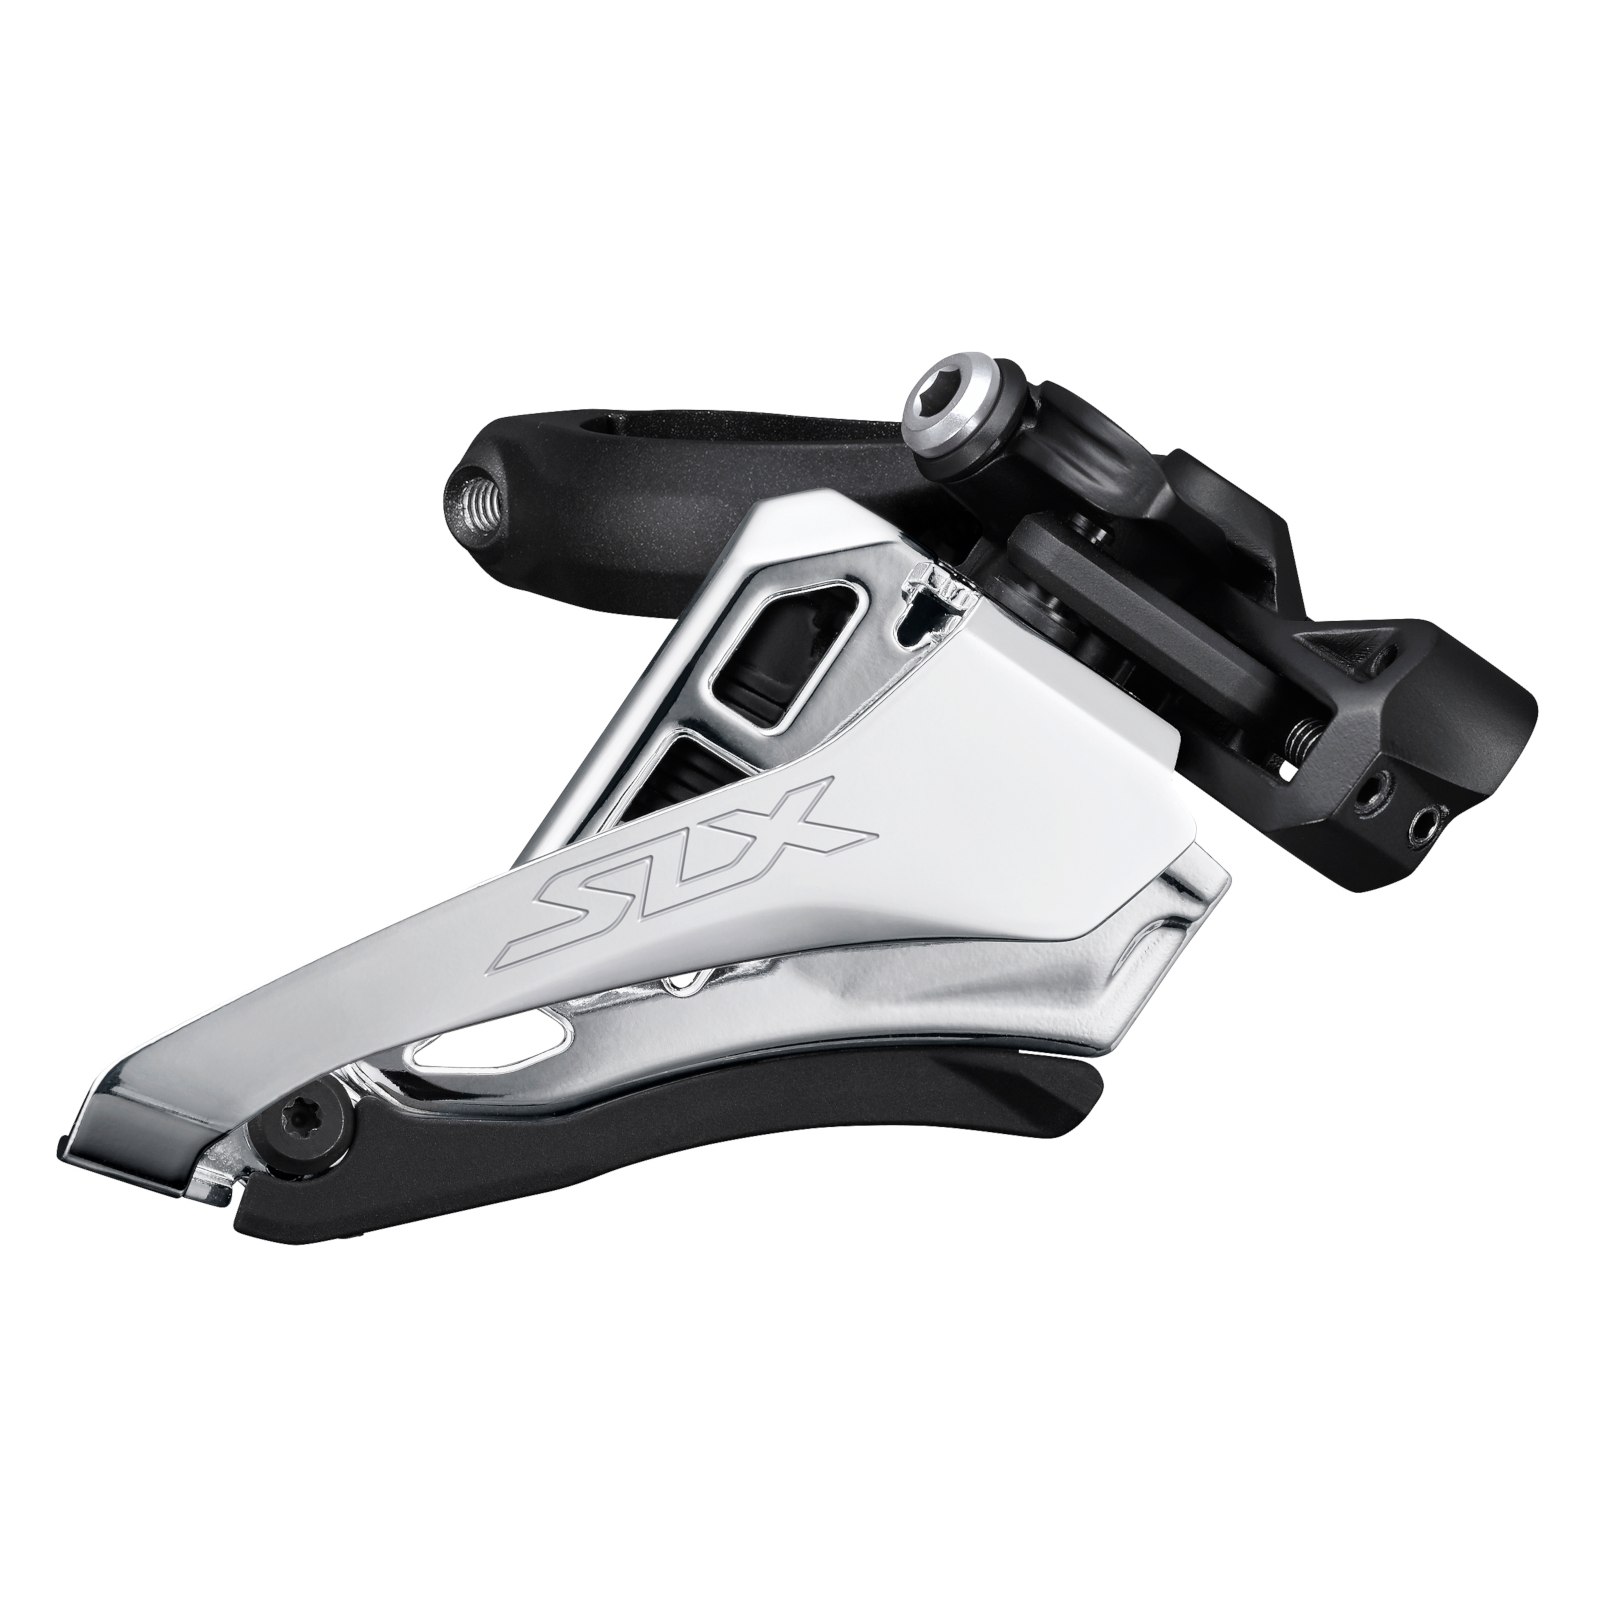 Productfoto van Shimano SLX FD-M7100 Side Swing Front Derailleur - 2x12-speed - Front Pull